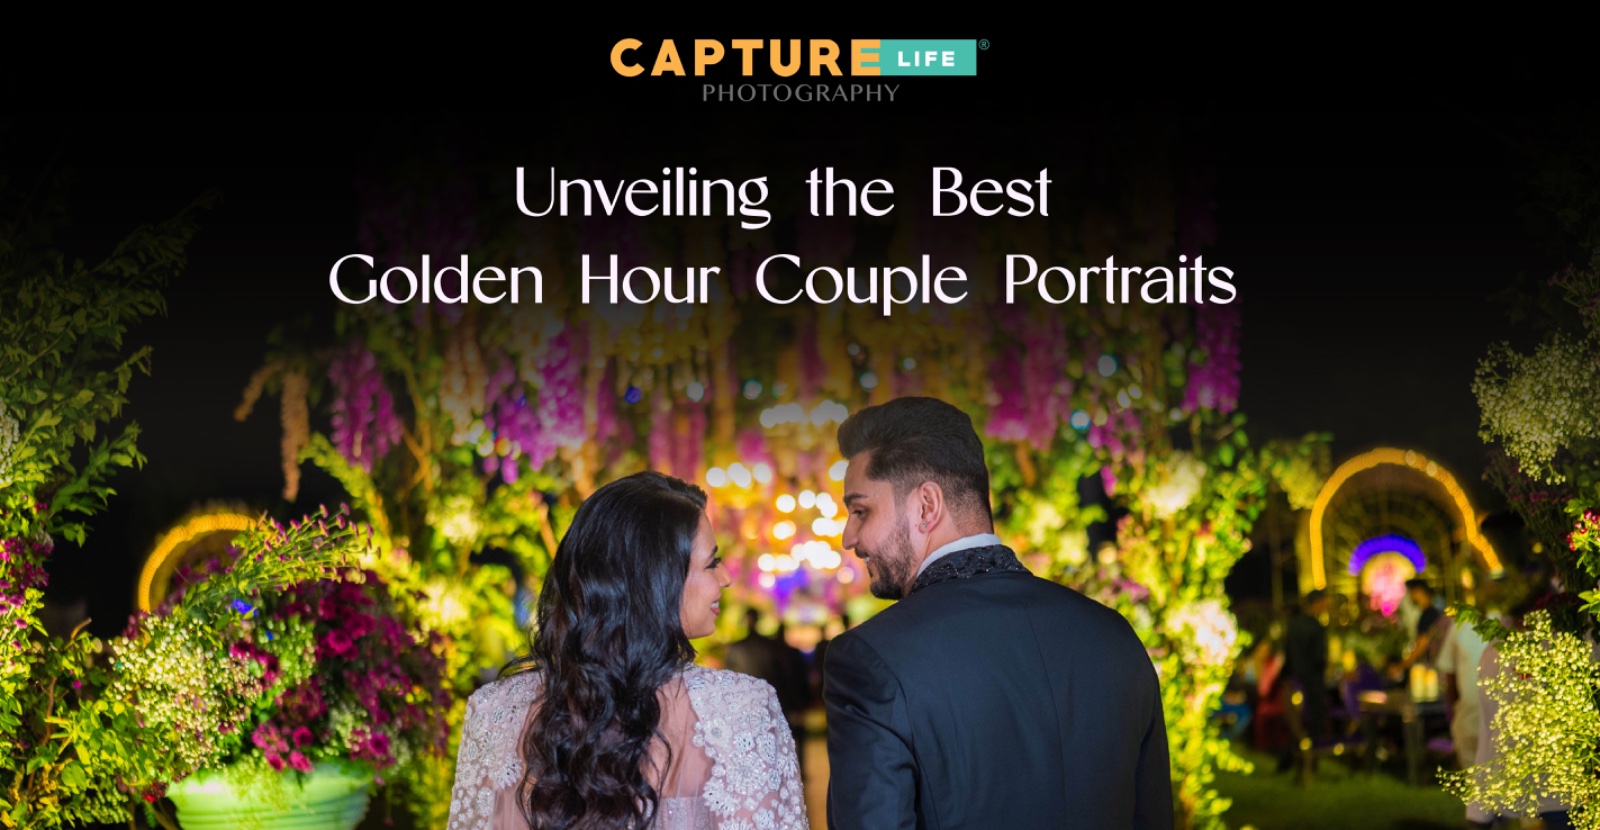 Candid couple portrait in golden hour light with warm, romantic ambiance